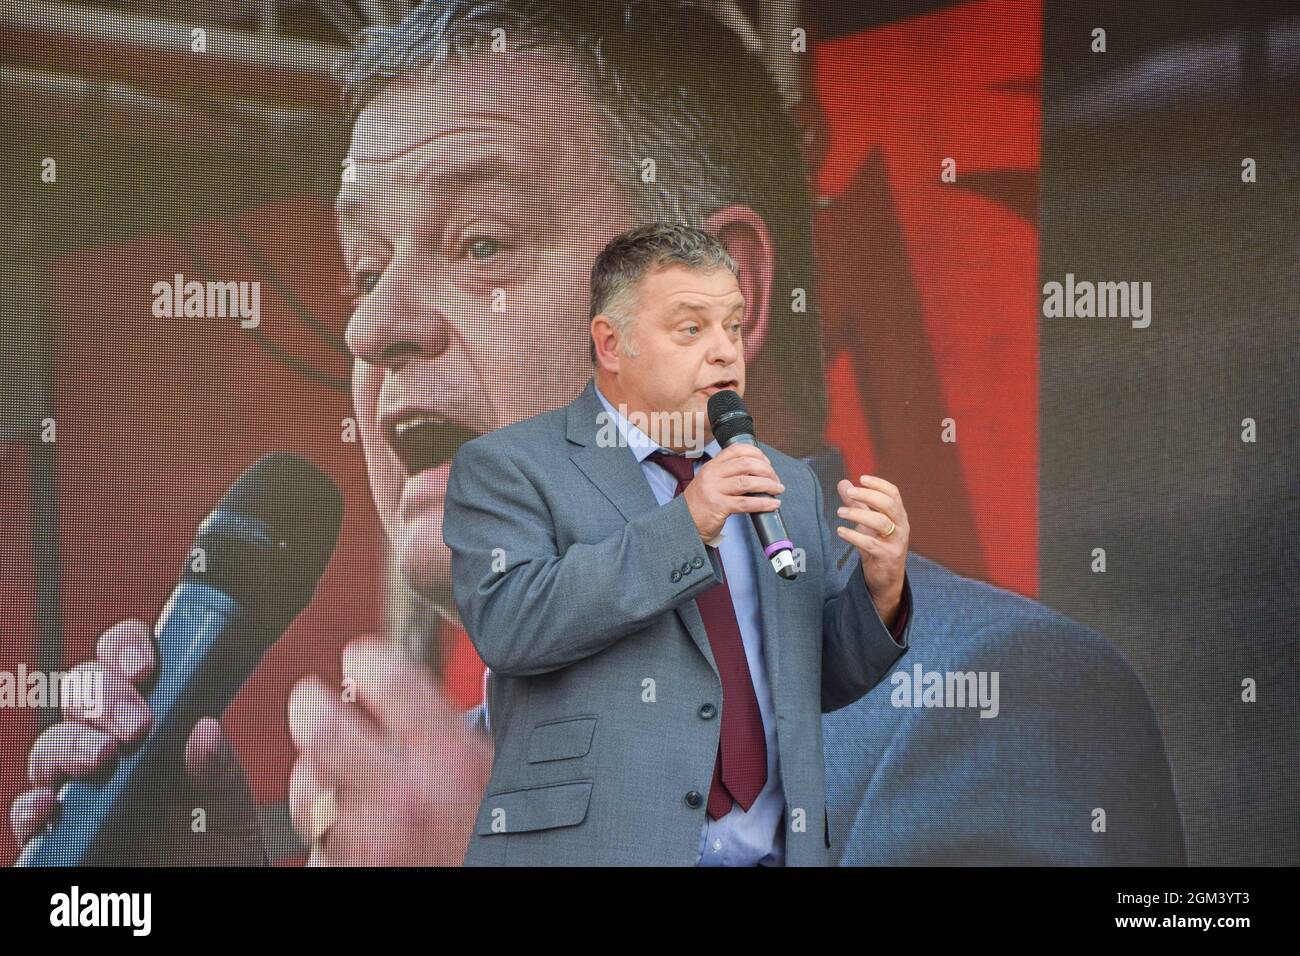 London, United Kingdom. 16th September 2021.  Mike Amesbury, Labour MP and Shadow Minister for Housing, speaking at the rally. Protesters gathered in Parliament Square to call on the government to address issues affecting leaseholders, including ending the cladding scandal and the outdated leasehold system. Credit: Vuk Valcic / Alamy Live News Stock Photo